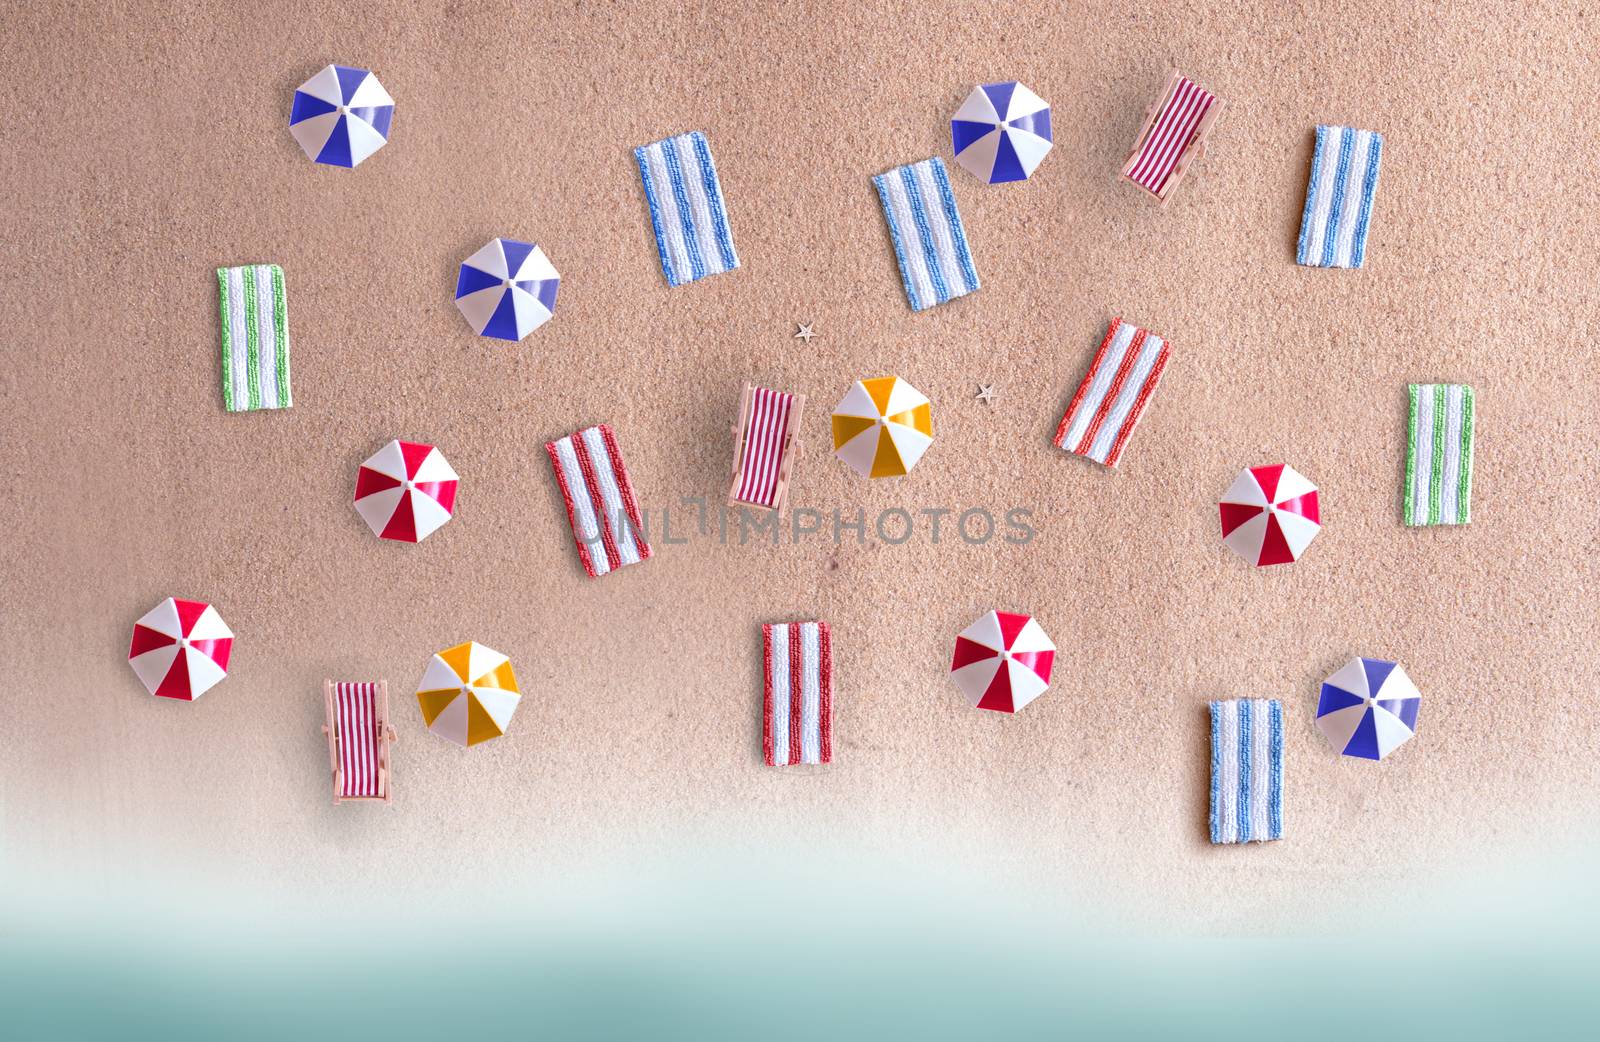 Miniature beach parasols and towels on sand 